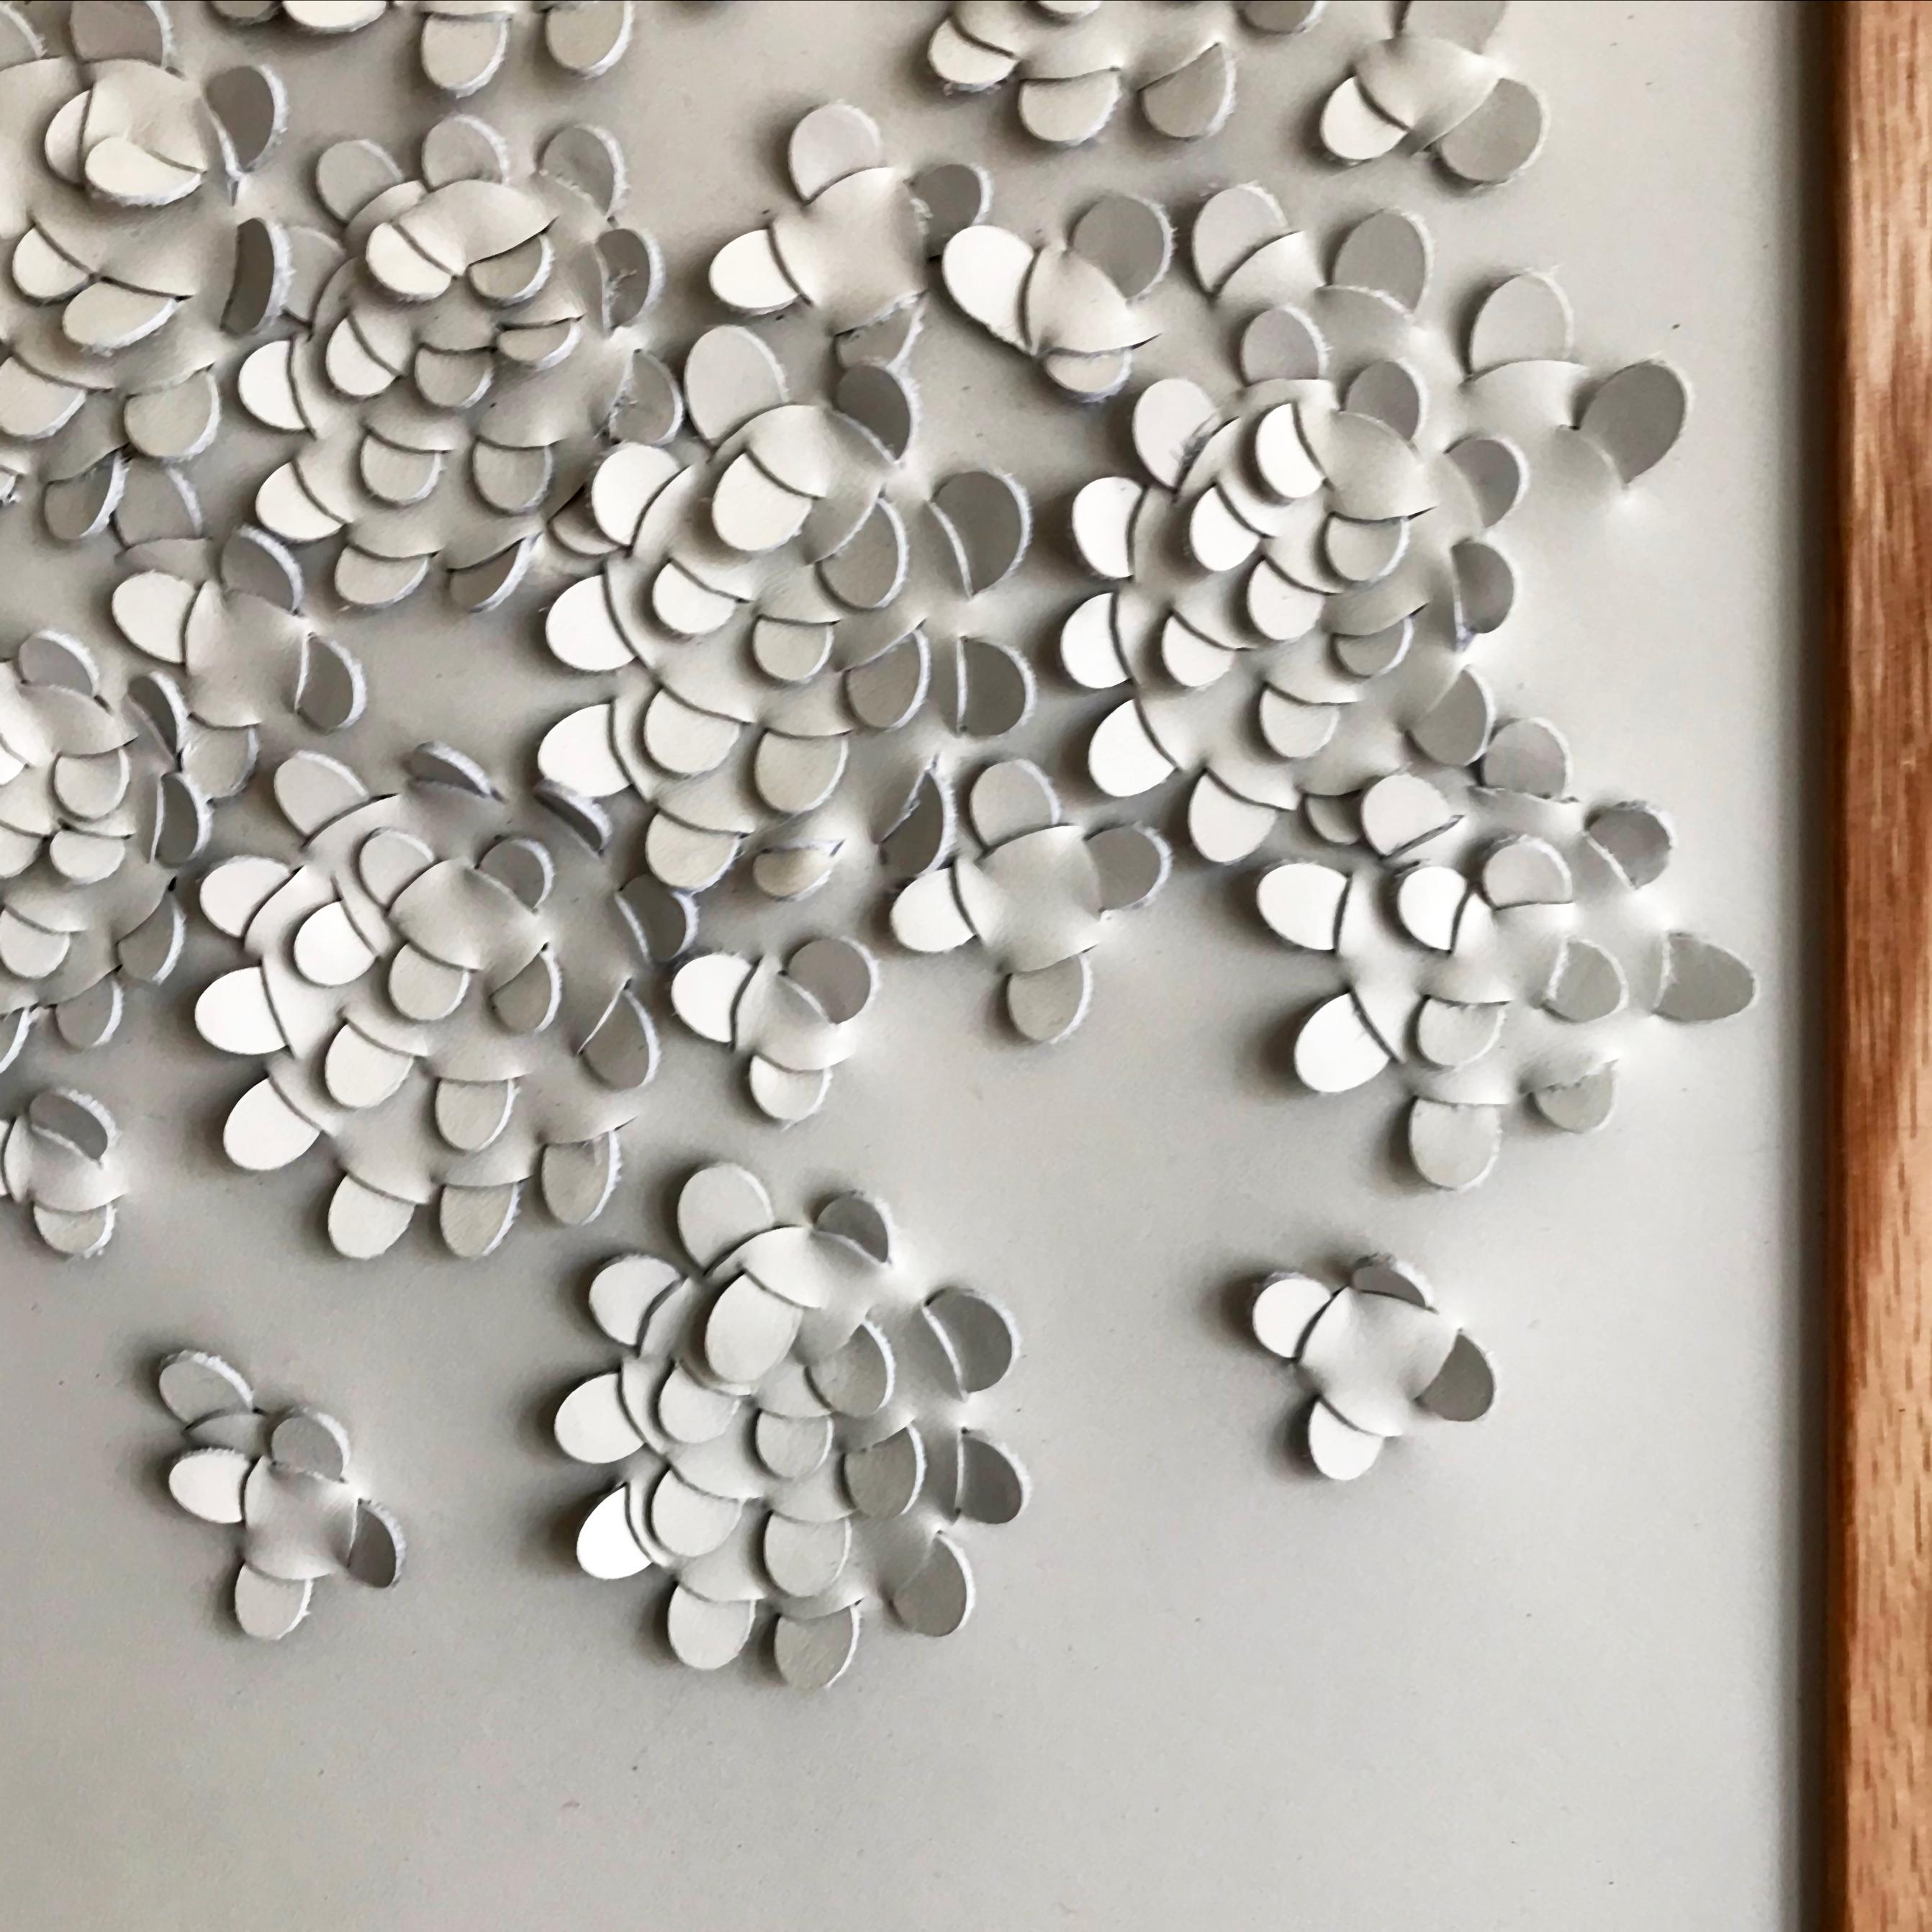 British Wildflower: A Piece of 3D Sculptural Cream Leather Wall Art For Sale